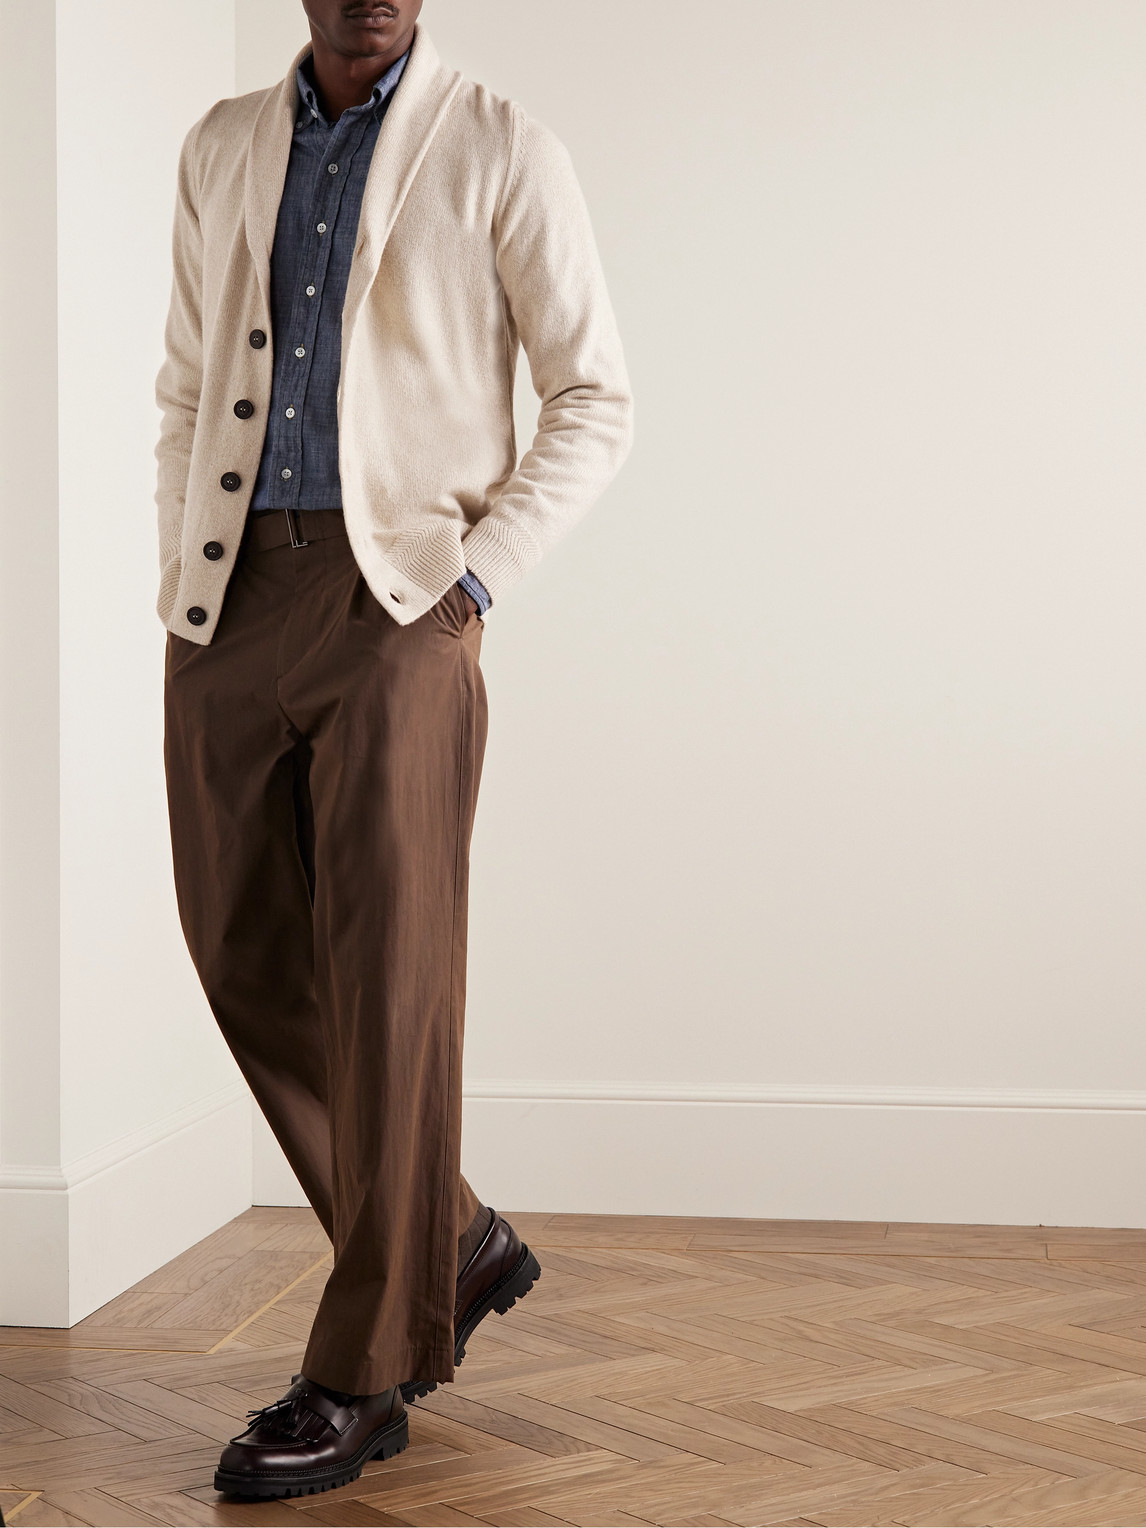 Shop John Smedley Cullen Slim-fit Recycled-cashmere And Merino Wool-blend Cardigan In Neutrals